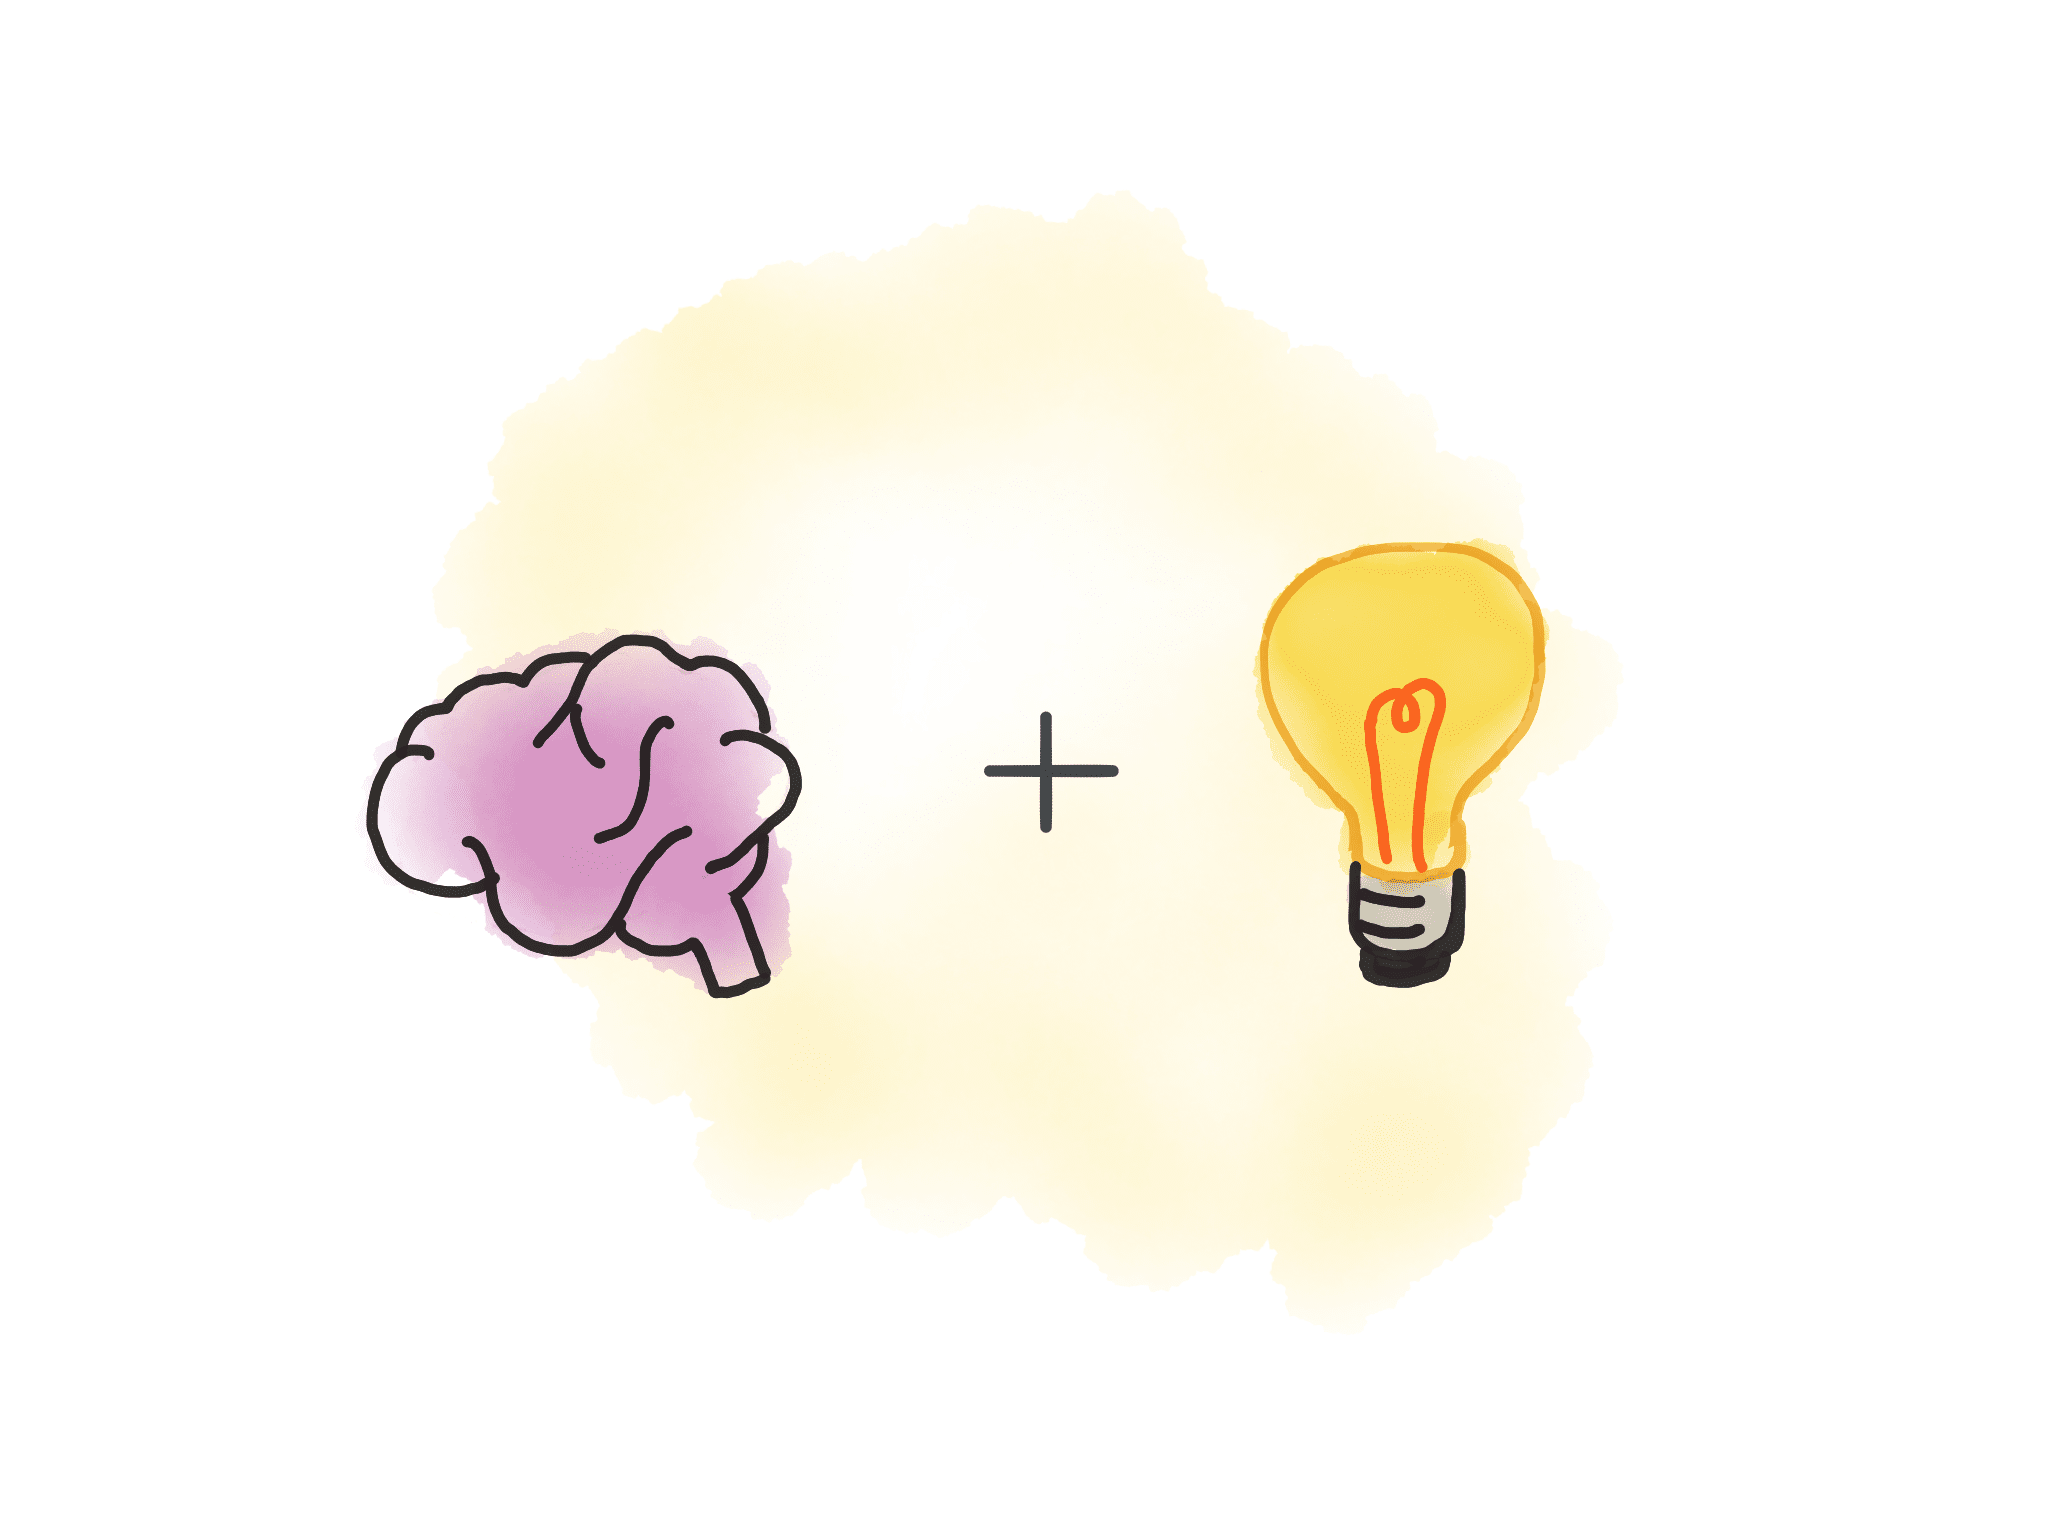 Illustration of a brain and a lightbulb